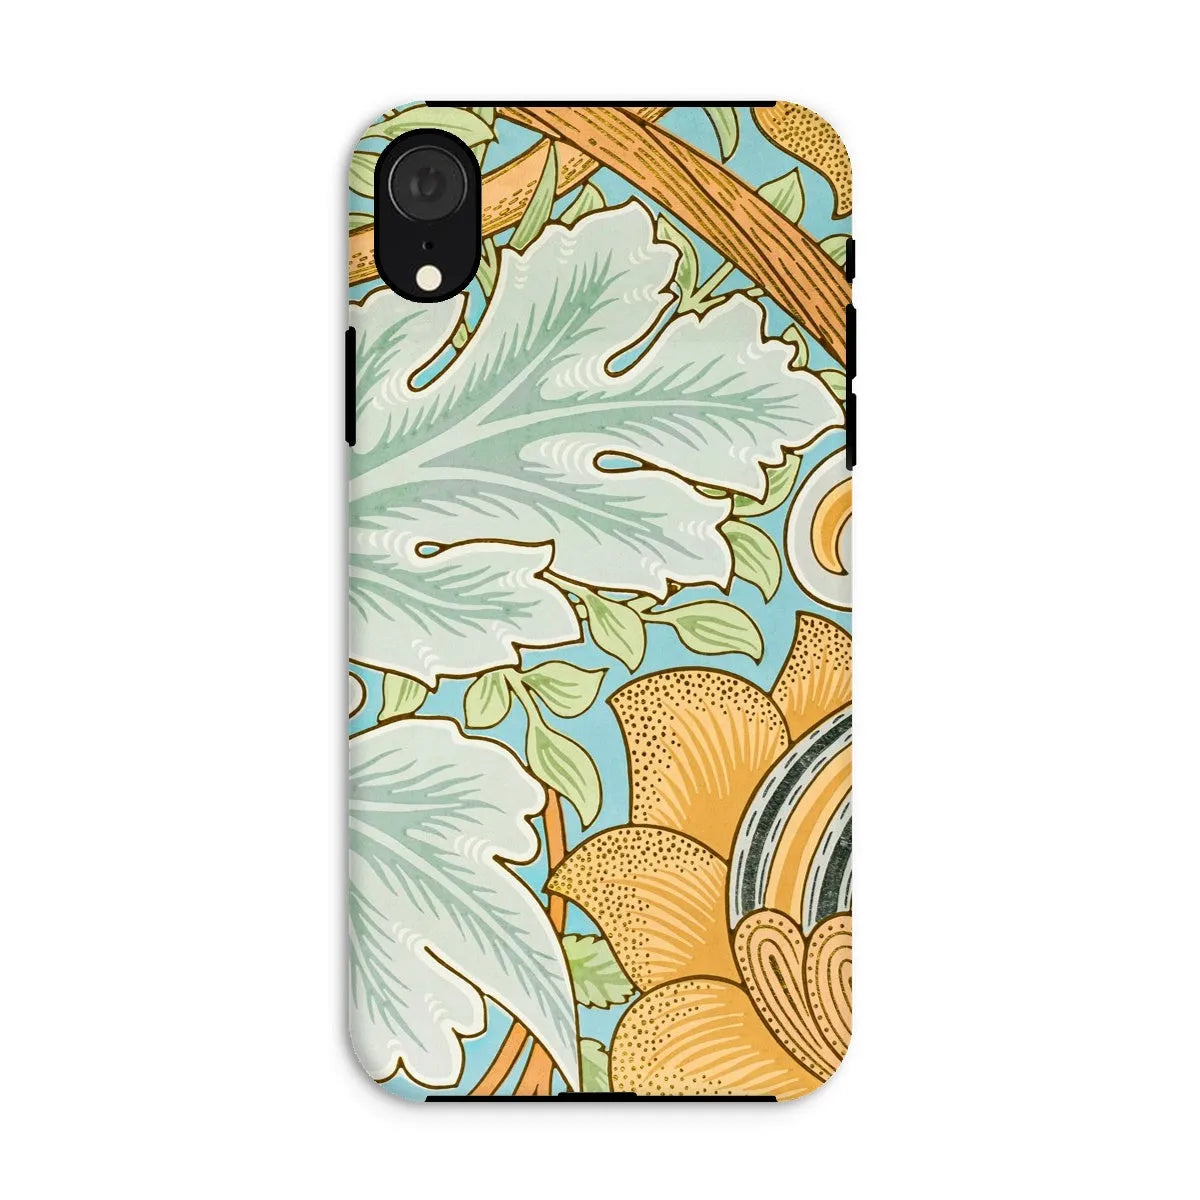 St. James - Arts And Crafts Phone Case - William Morris - Iphone Xr / Matte - Mobile Phone Cases - Aesthetic Art